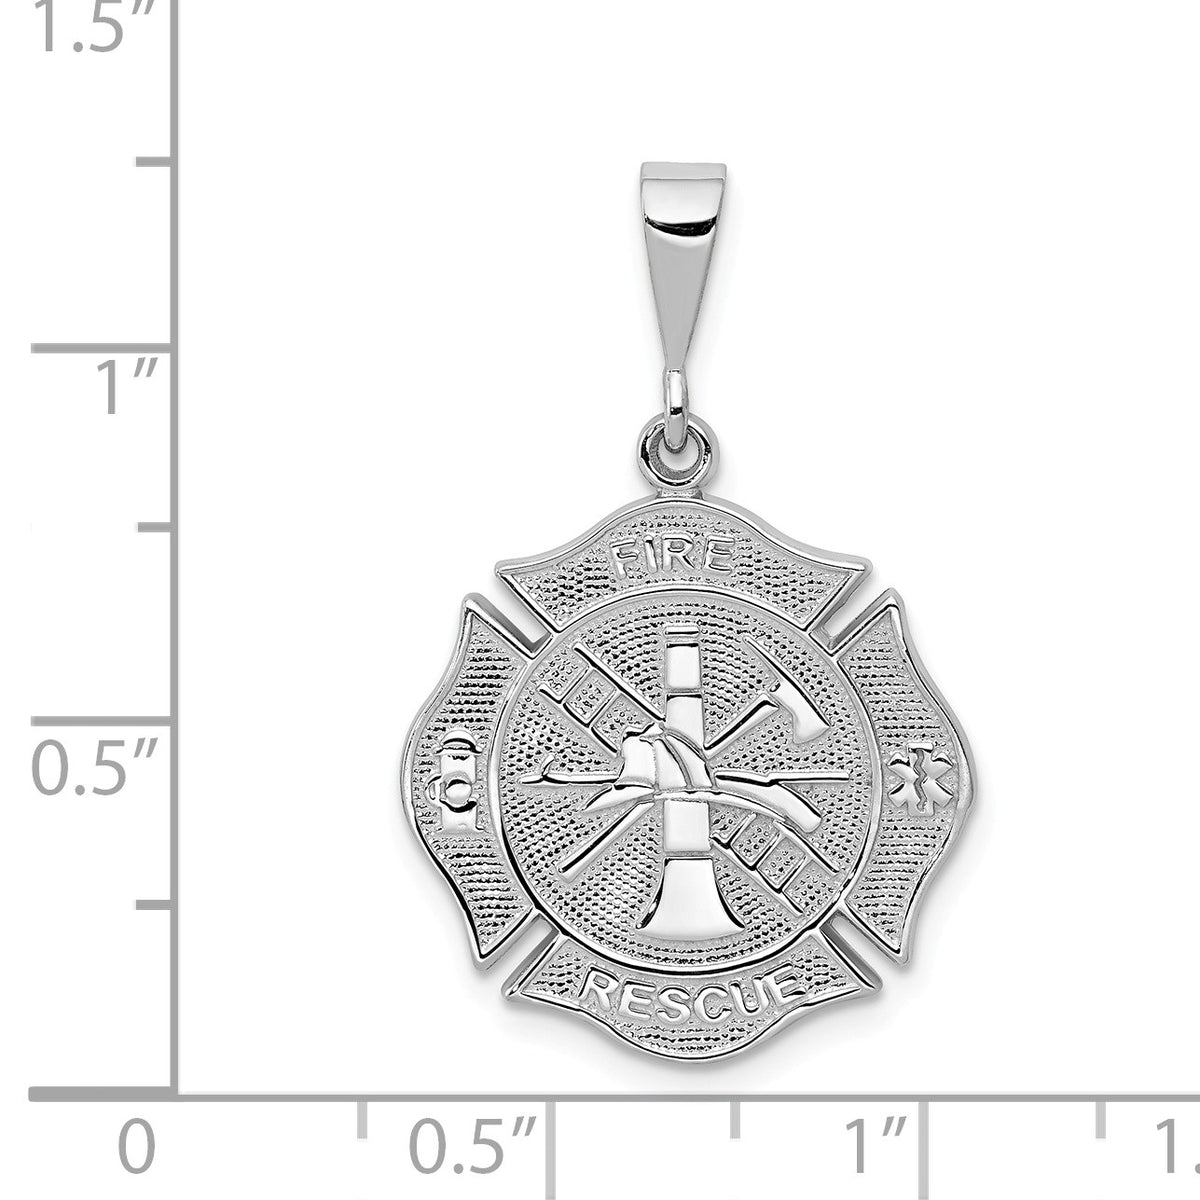 Alternate view of the 14k White Gold Textured Fire Rescue Shield Pendant by The Black Bow Jewelry Co.